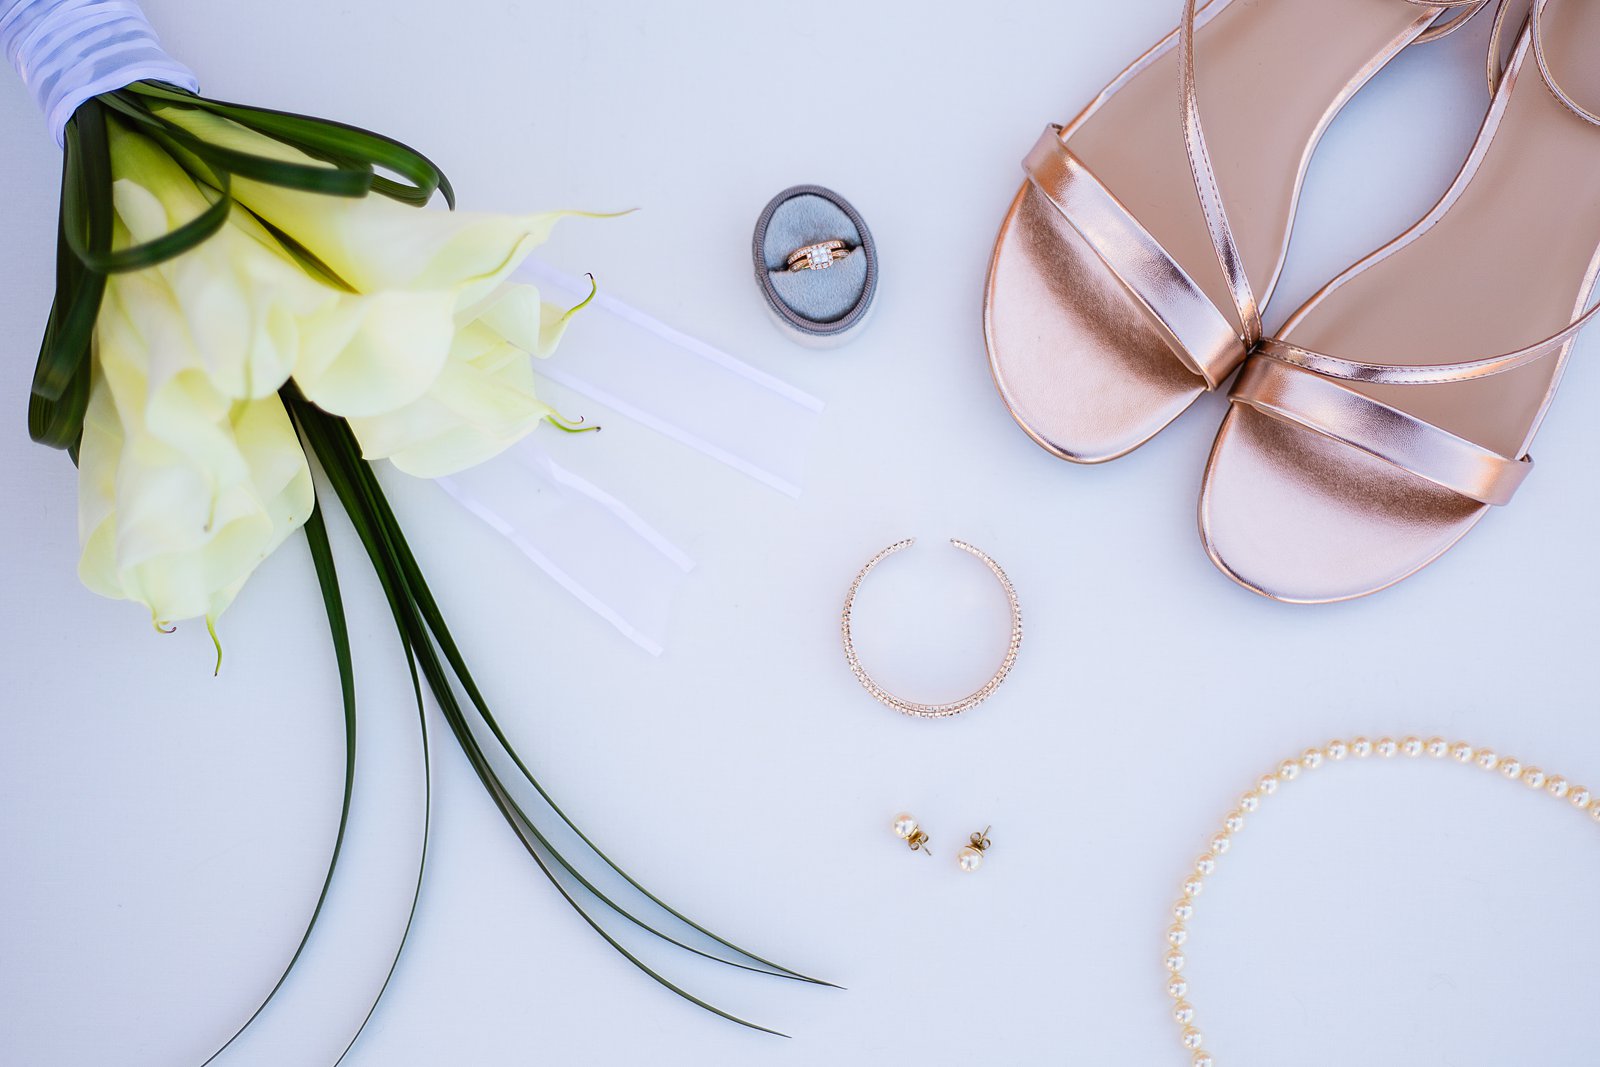 Brides's wedding day details of pearl and rose gold bridal jewelry and shoes by PMA Photography.